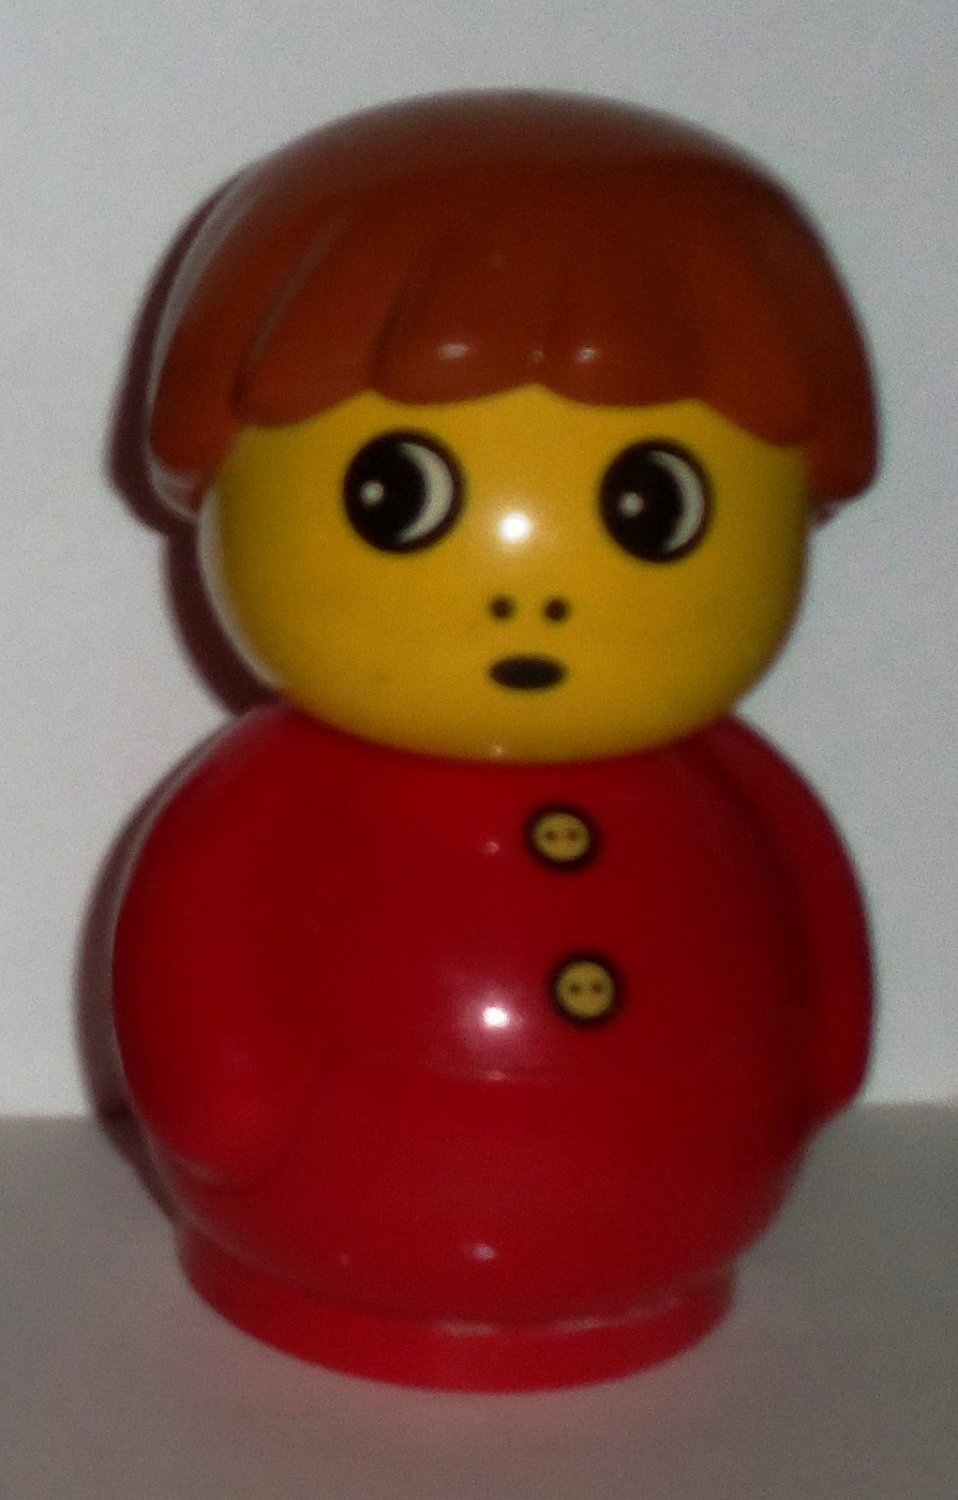 Lego Duplo Primo Figure Boy Red Base Top Two Buttons Brown Hair Loose Used